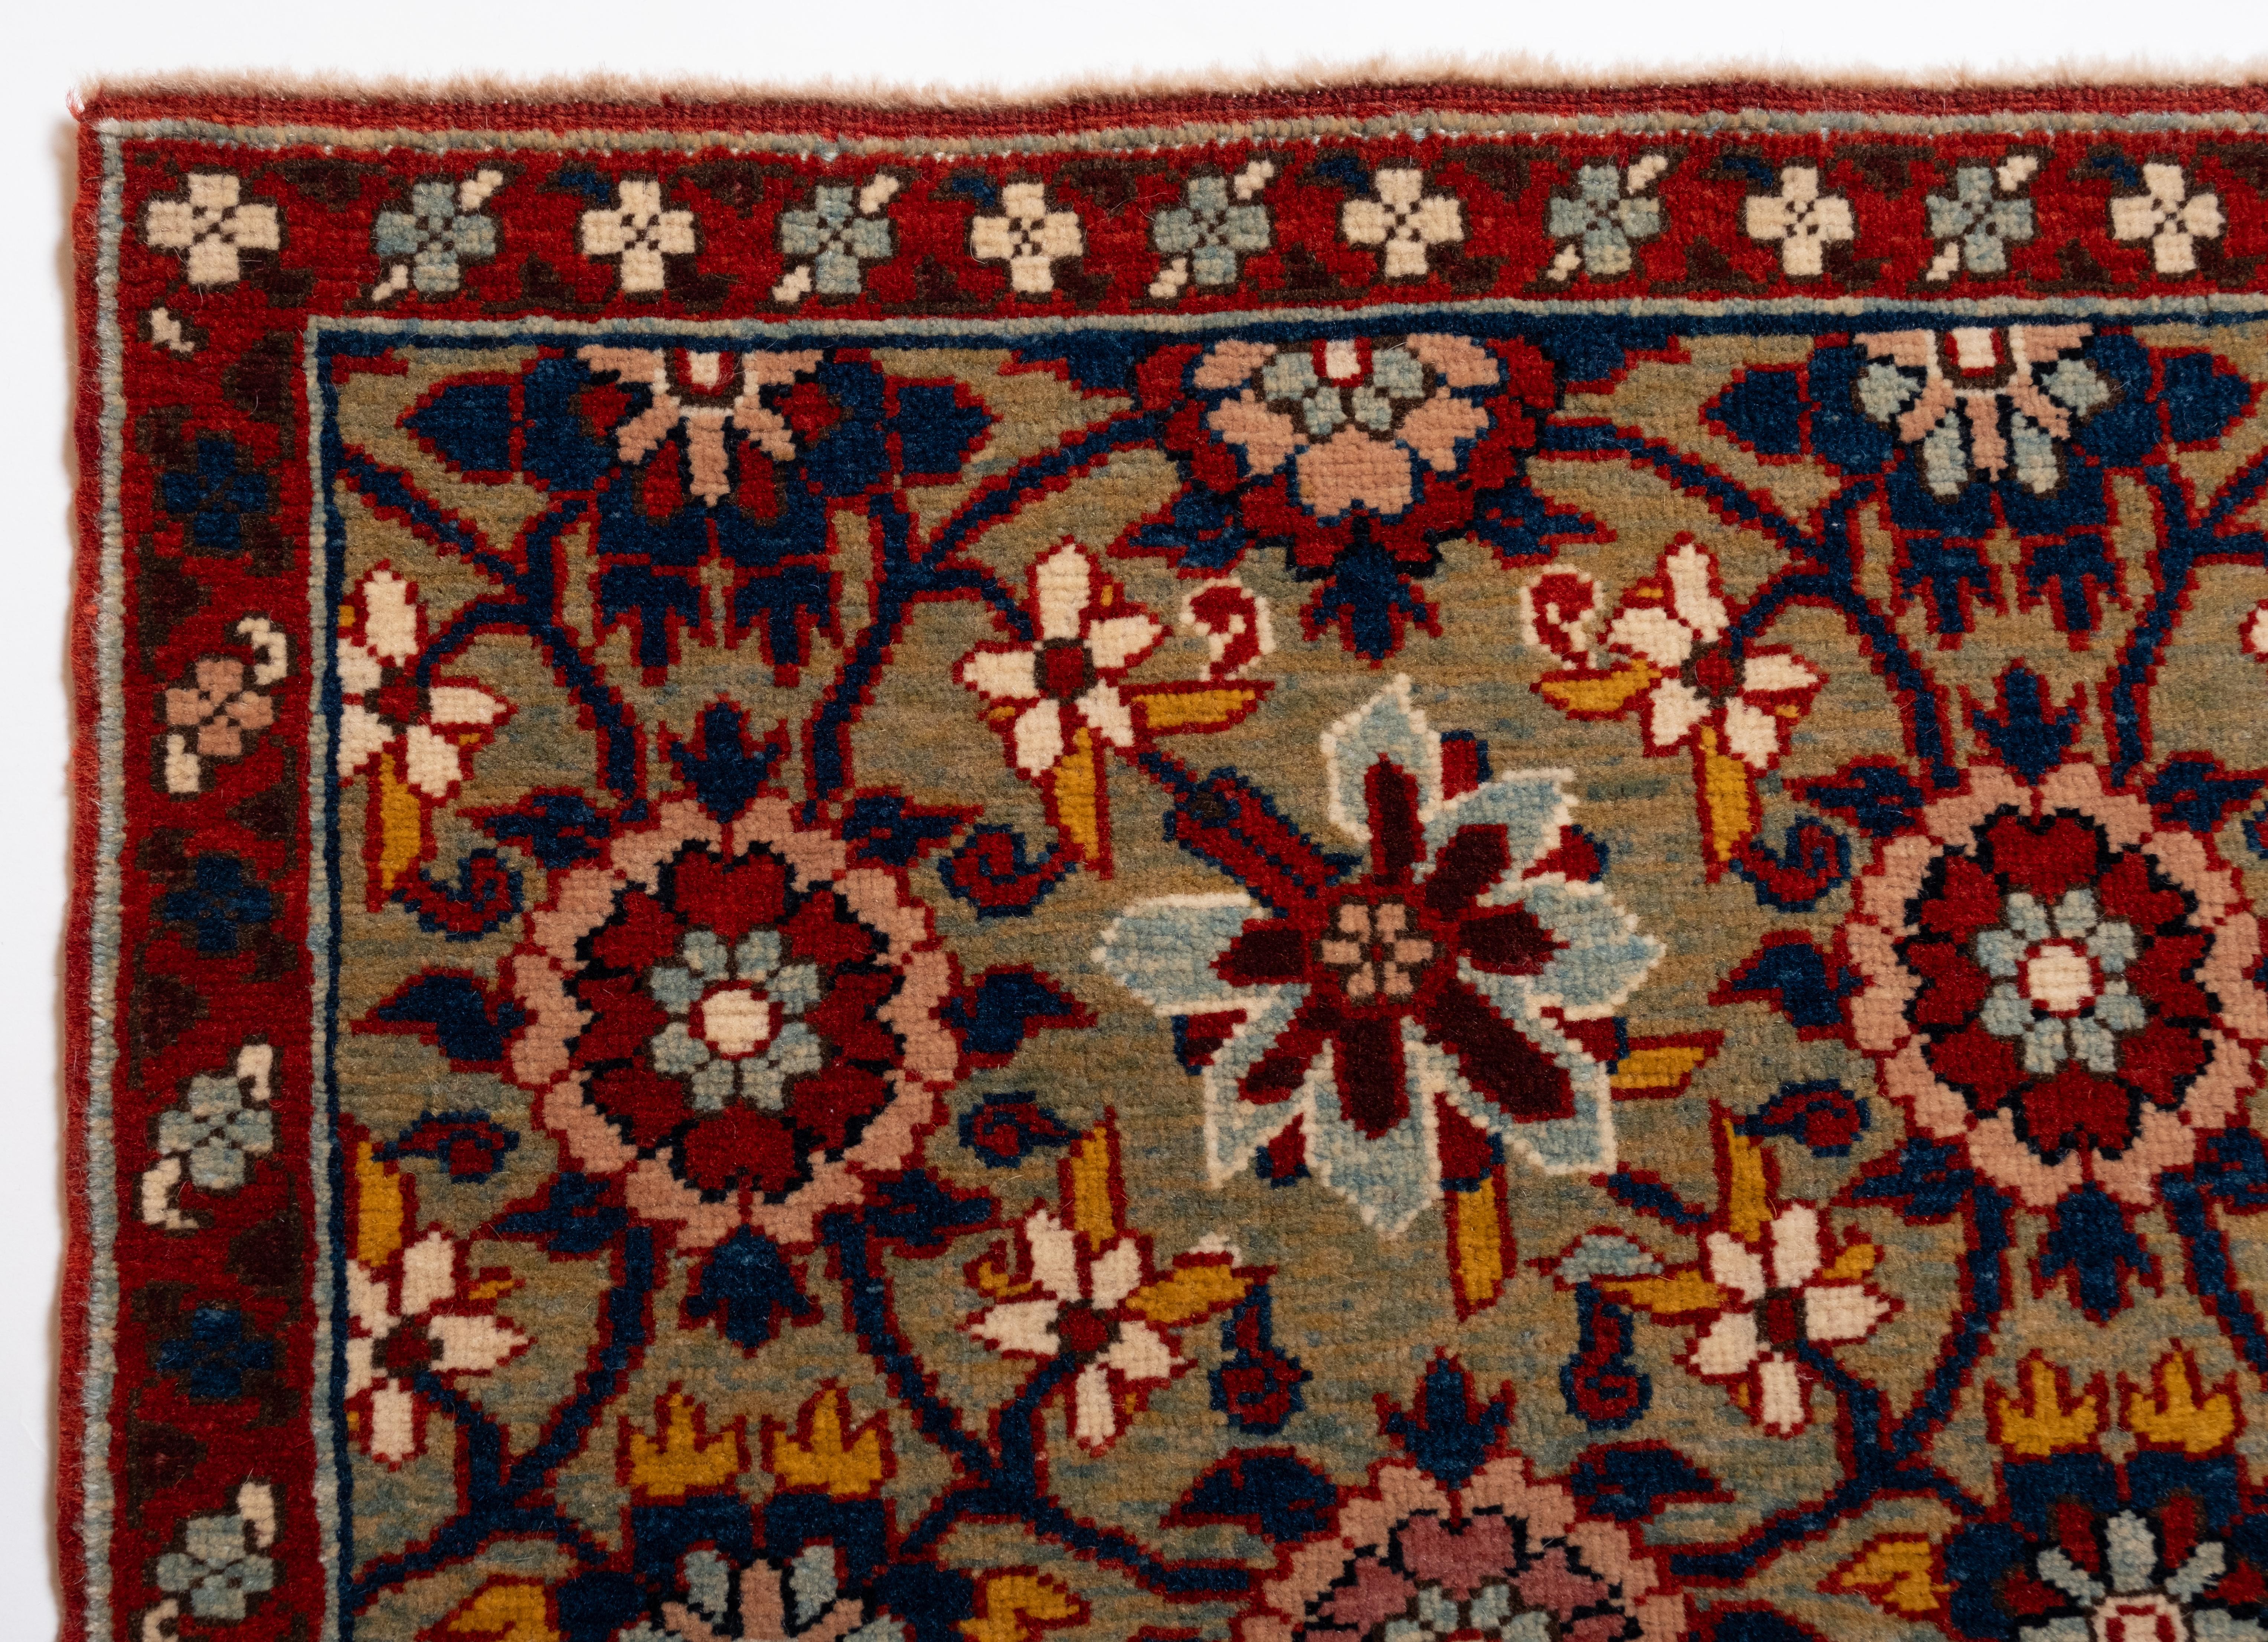 The source of the rug comes from the book Antique Rugs of Kurdistan A Historical Legacy of Woven Art, James D. Burns, 2002 nr.2. This was an exclusive example of a Mina Khani lattice design mid-19th century rug from Koliya'i, Southern Kurdistan